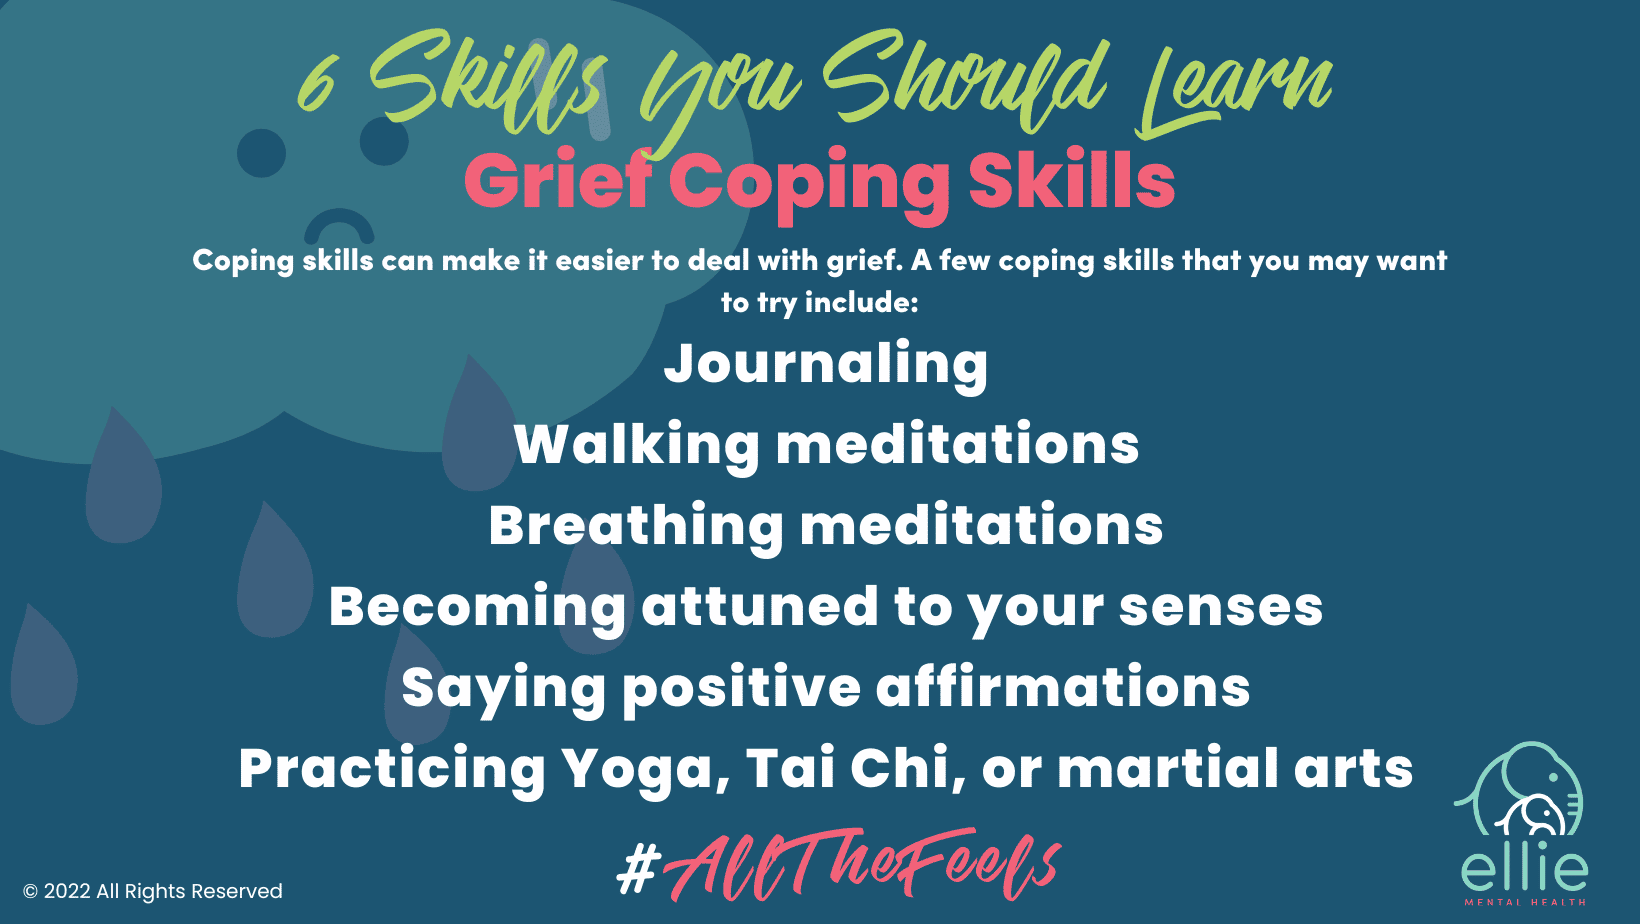 6 Skills You Should Learn Grief Coping Skills Infographic